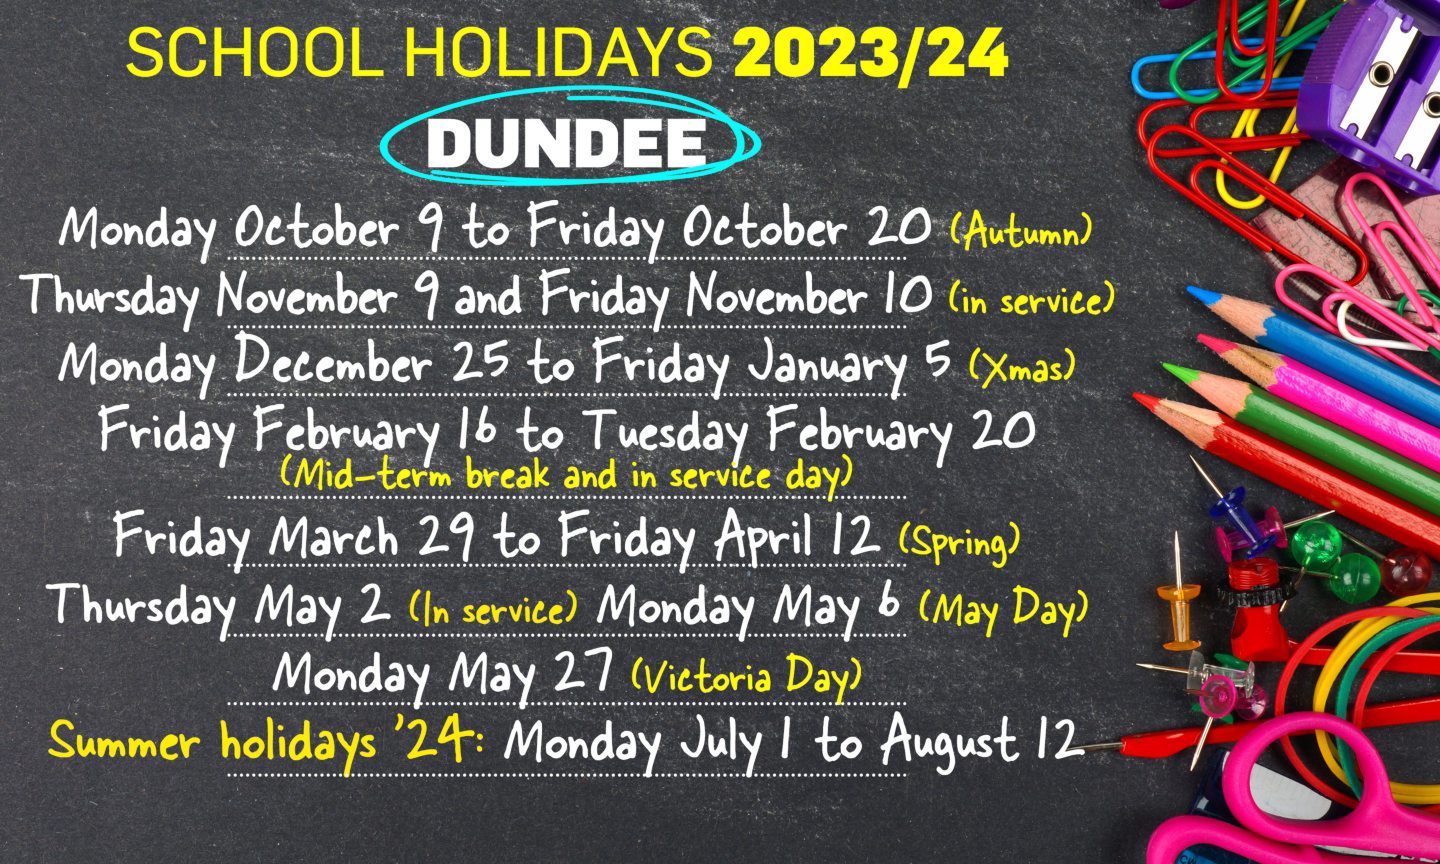 Dundee school holidays 2023/2024 with printerfriendly calendars